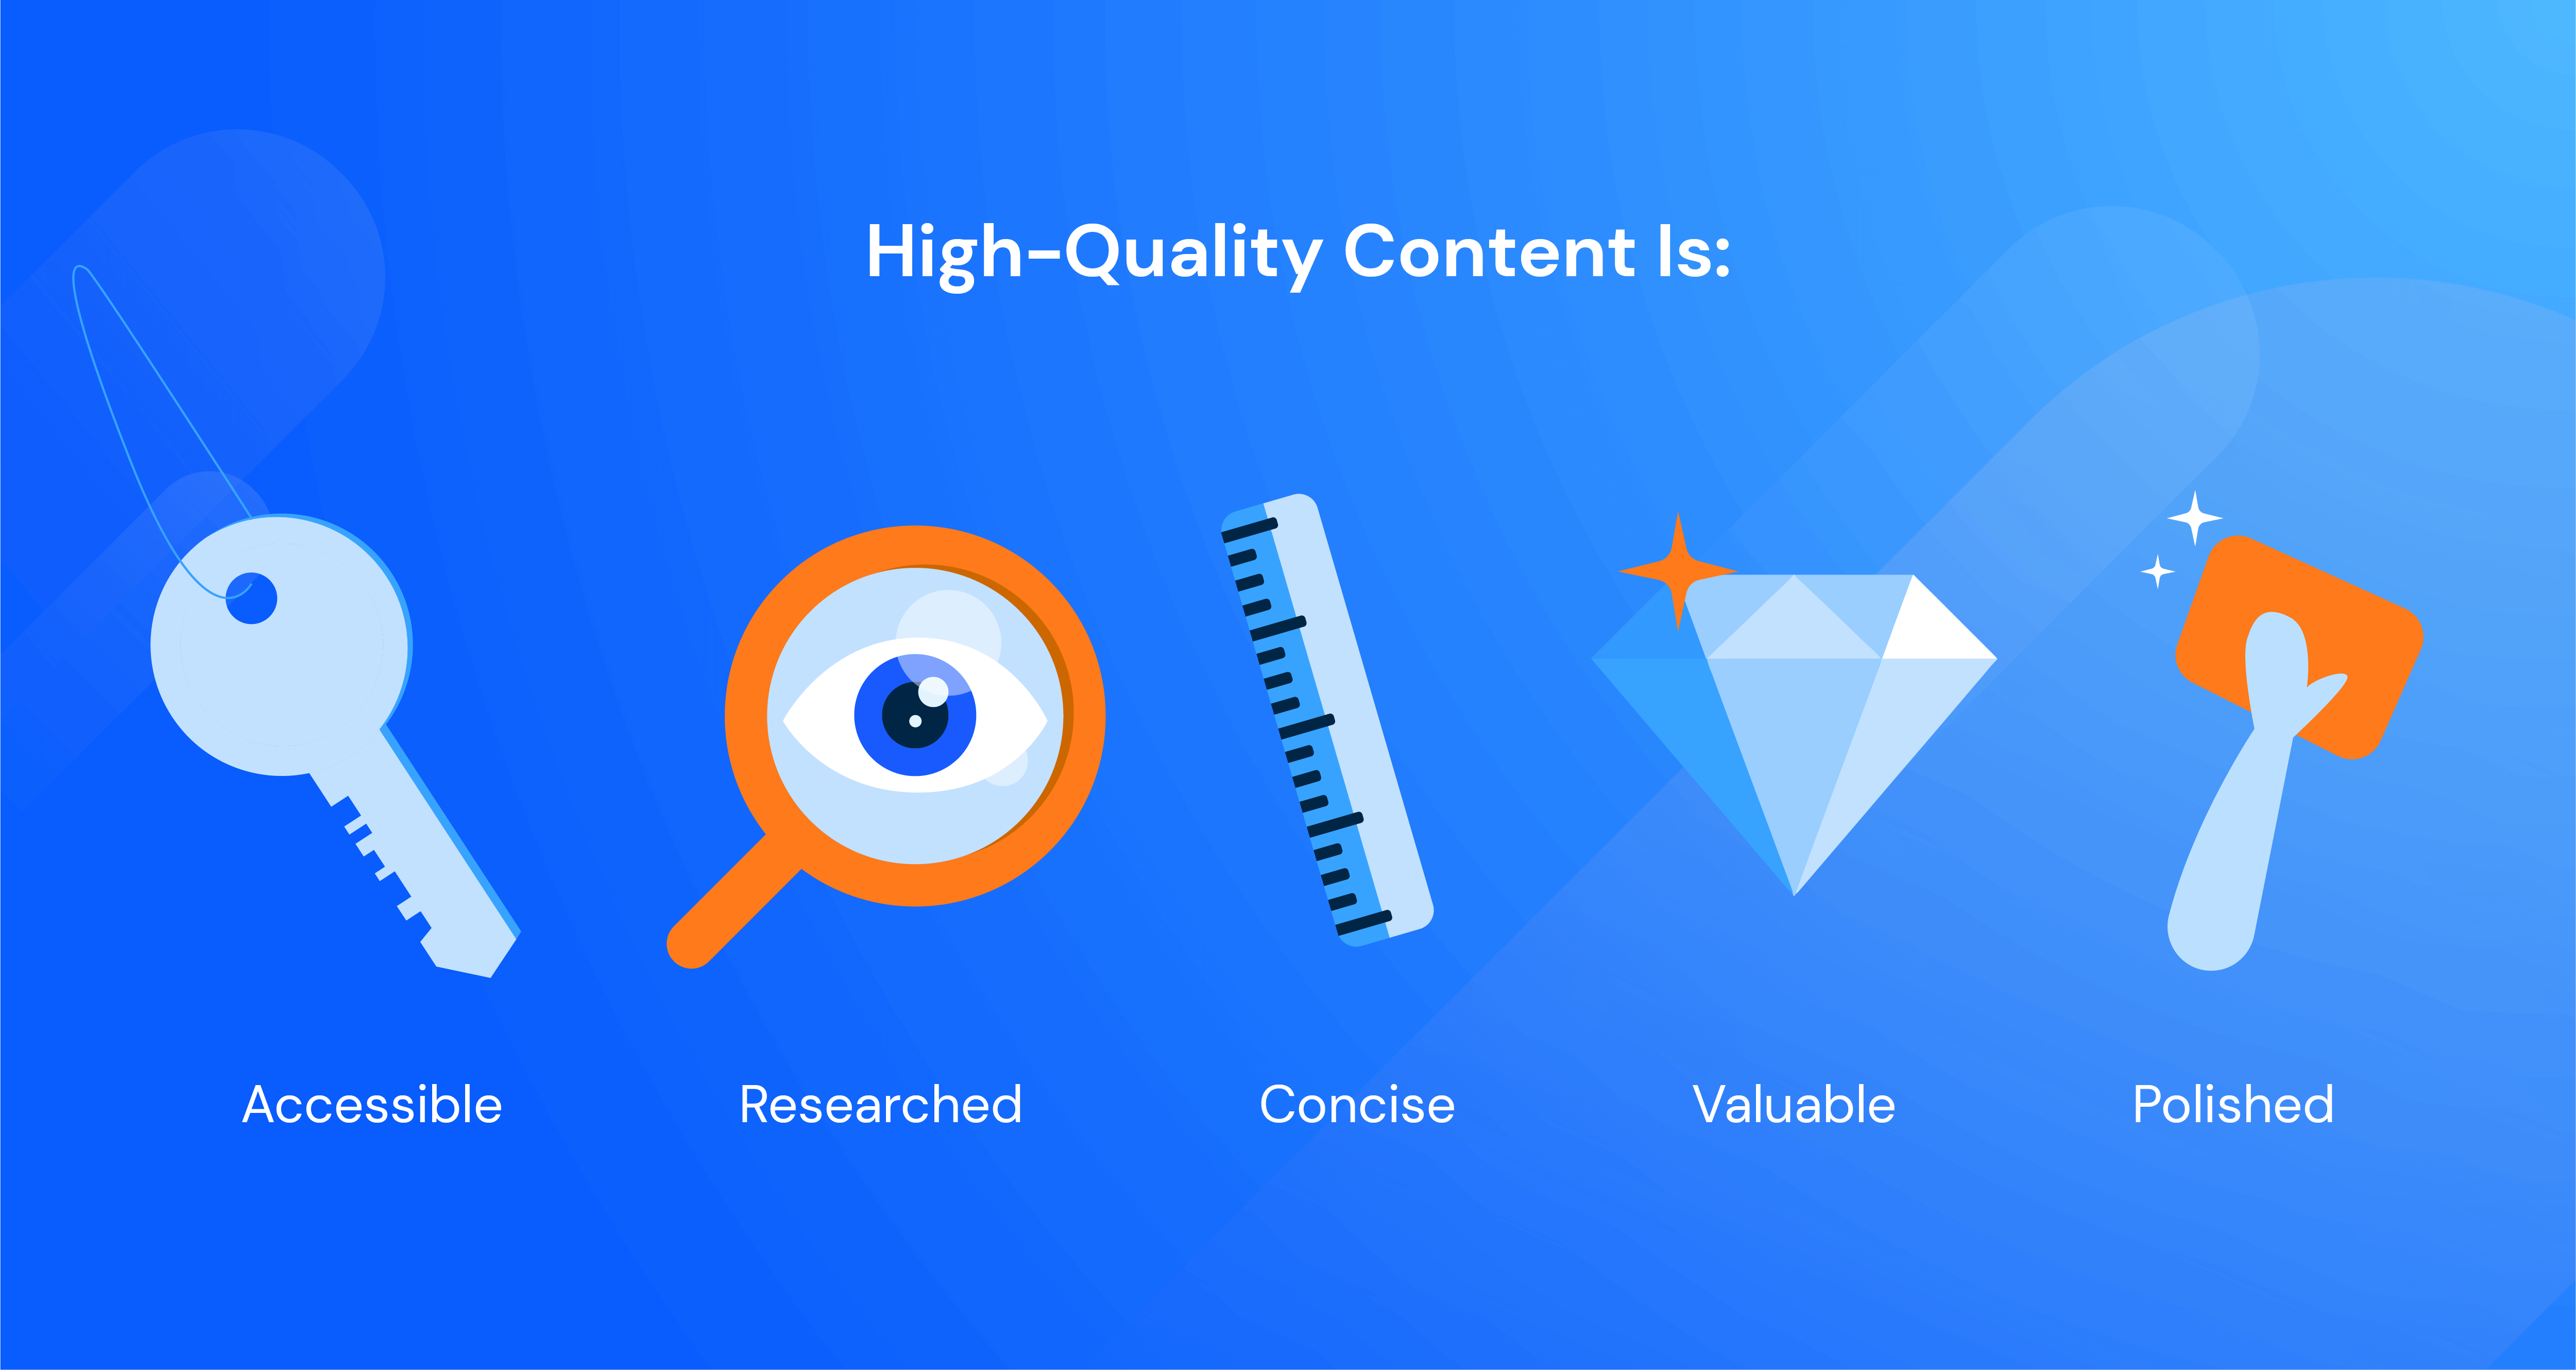 High-quality content is accessible, researched, concise, valuable,and polished graphic for on-page SEO